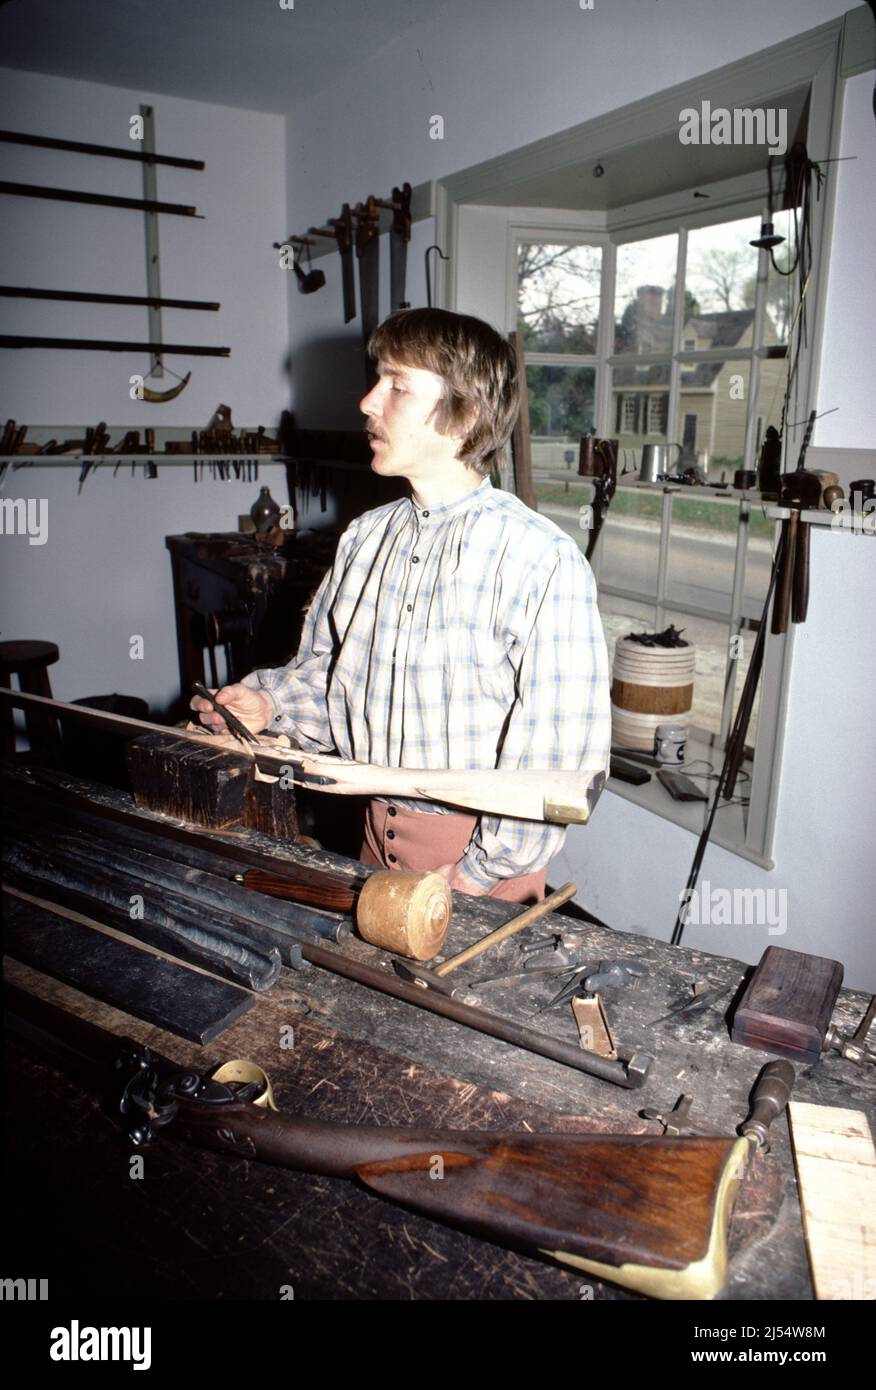 Williamsburg, VA. U.S.A. 9/1987. Master gunsmith for Colonial 18th Century rifles, pistols and fowling shotguns.  Using 18th century gunsmithing tools craft each firearm from wood stock to lock. Stock Photo